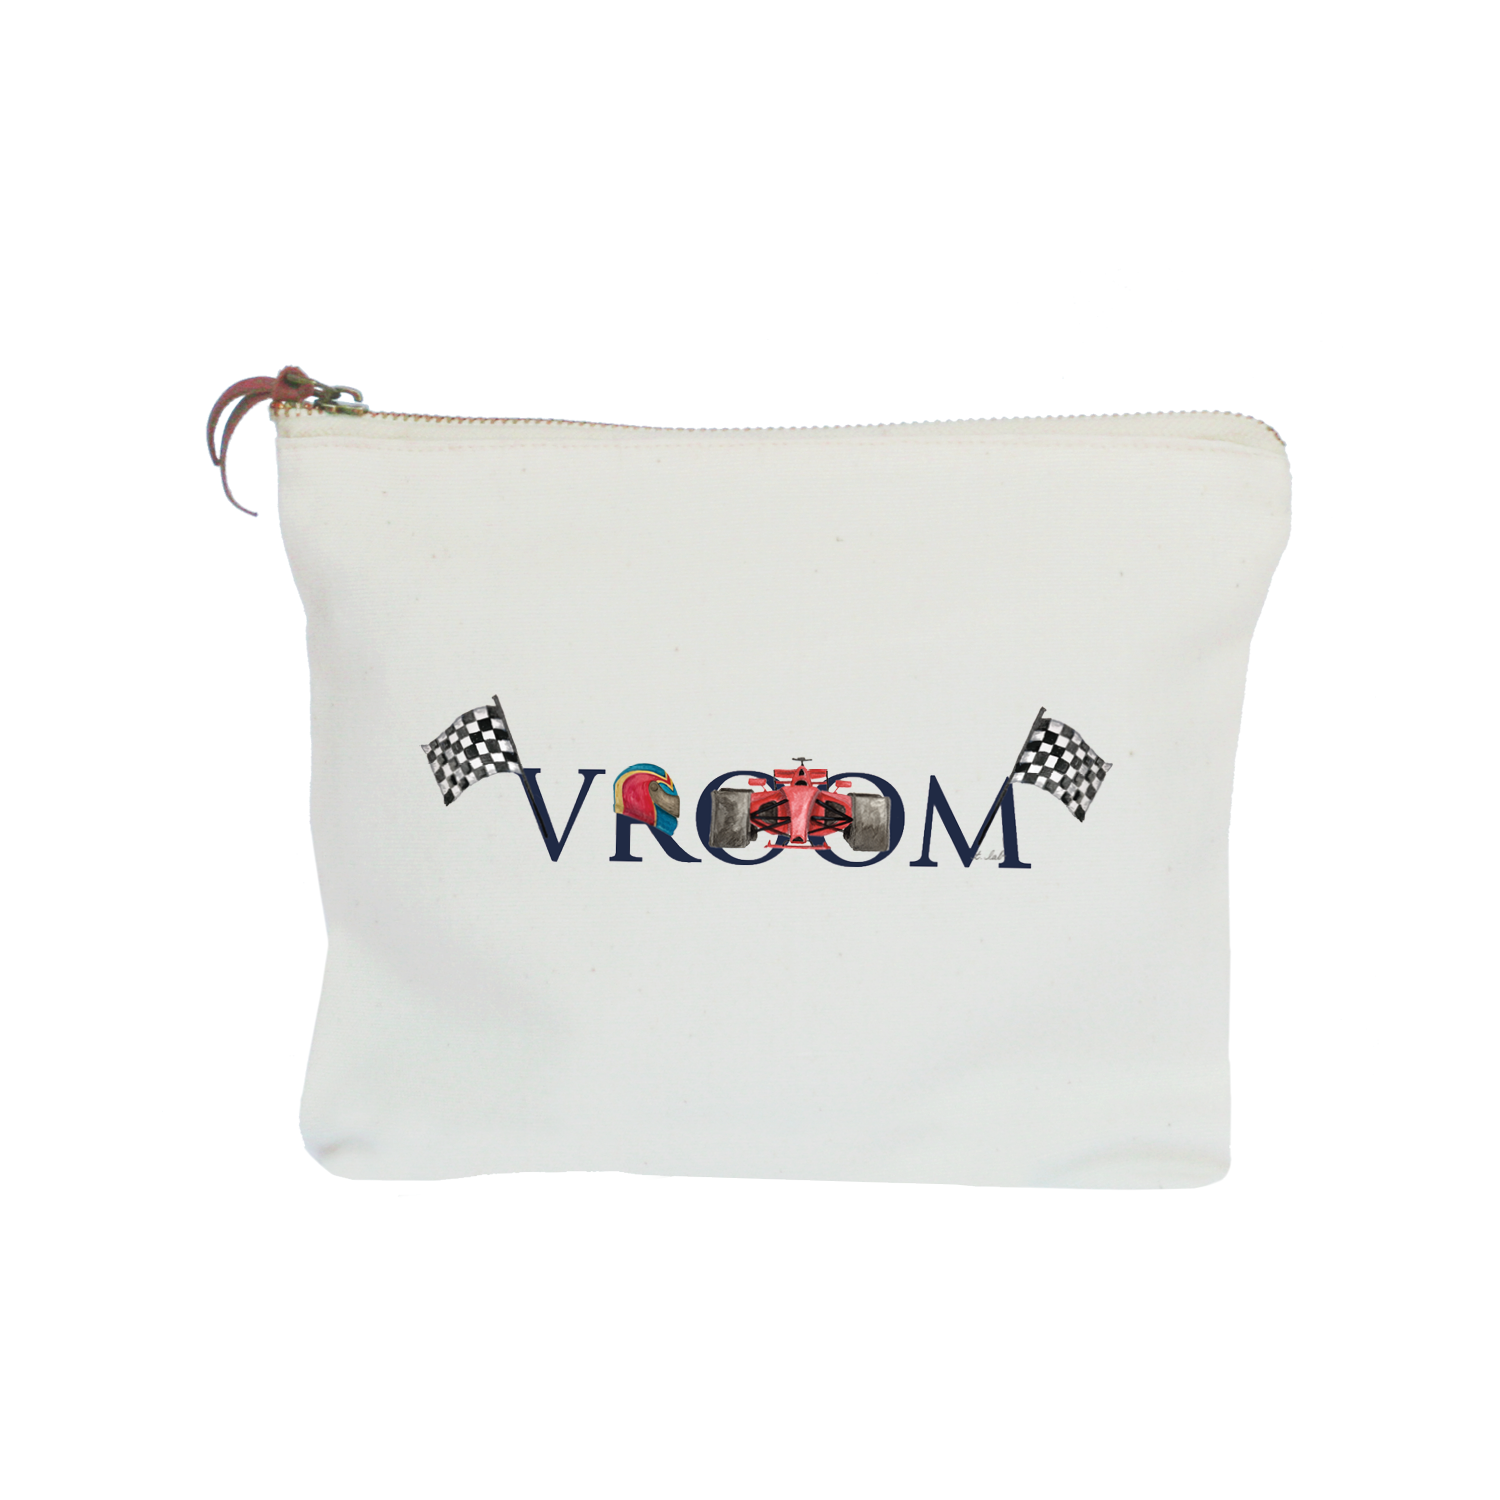 vroom zipper pouch